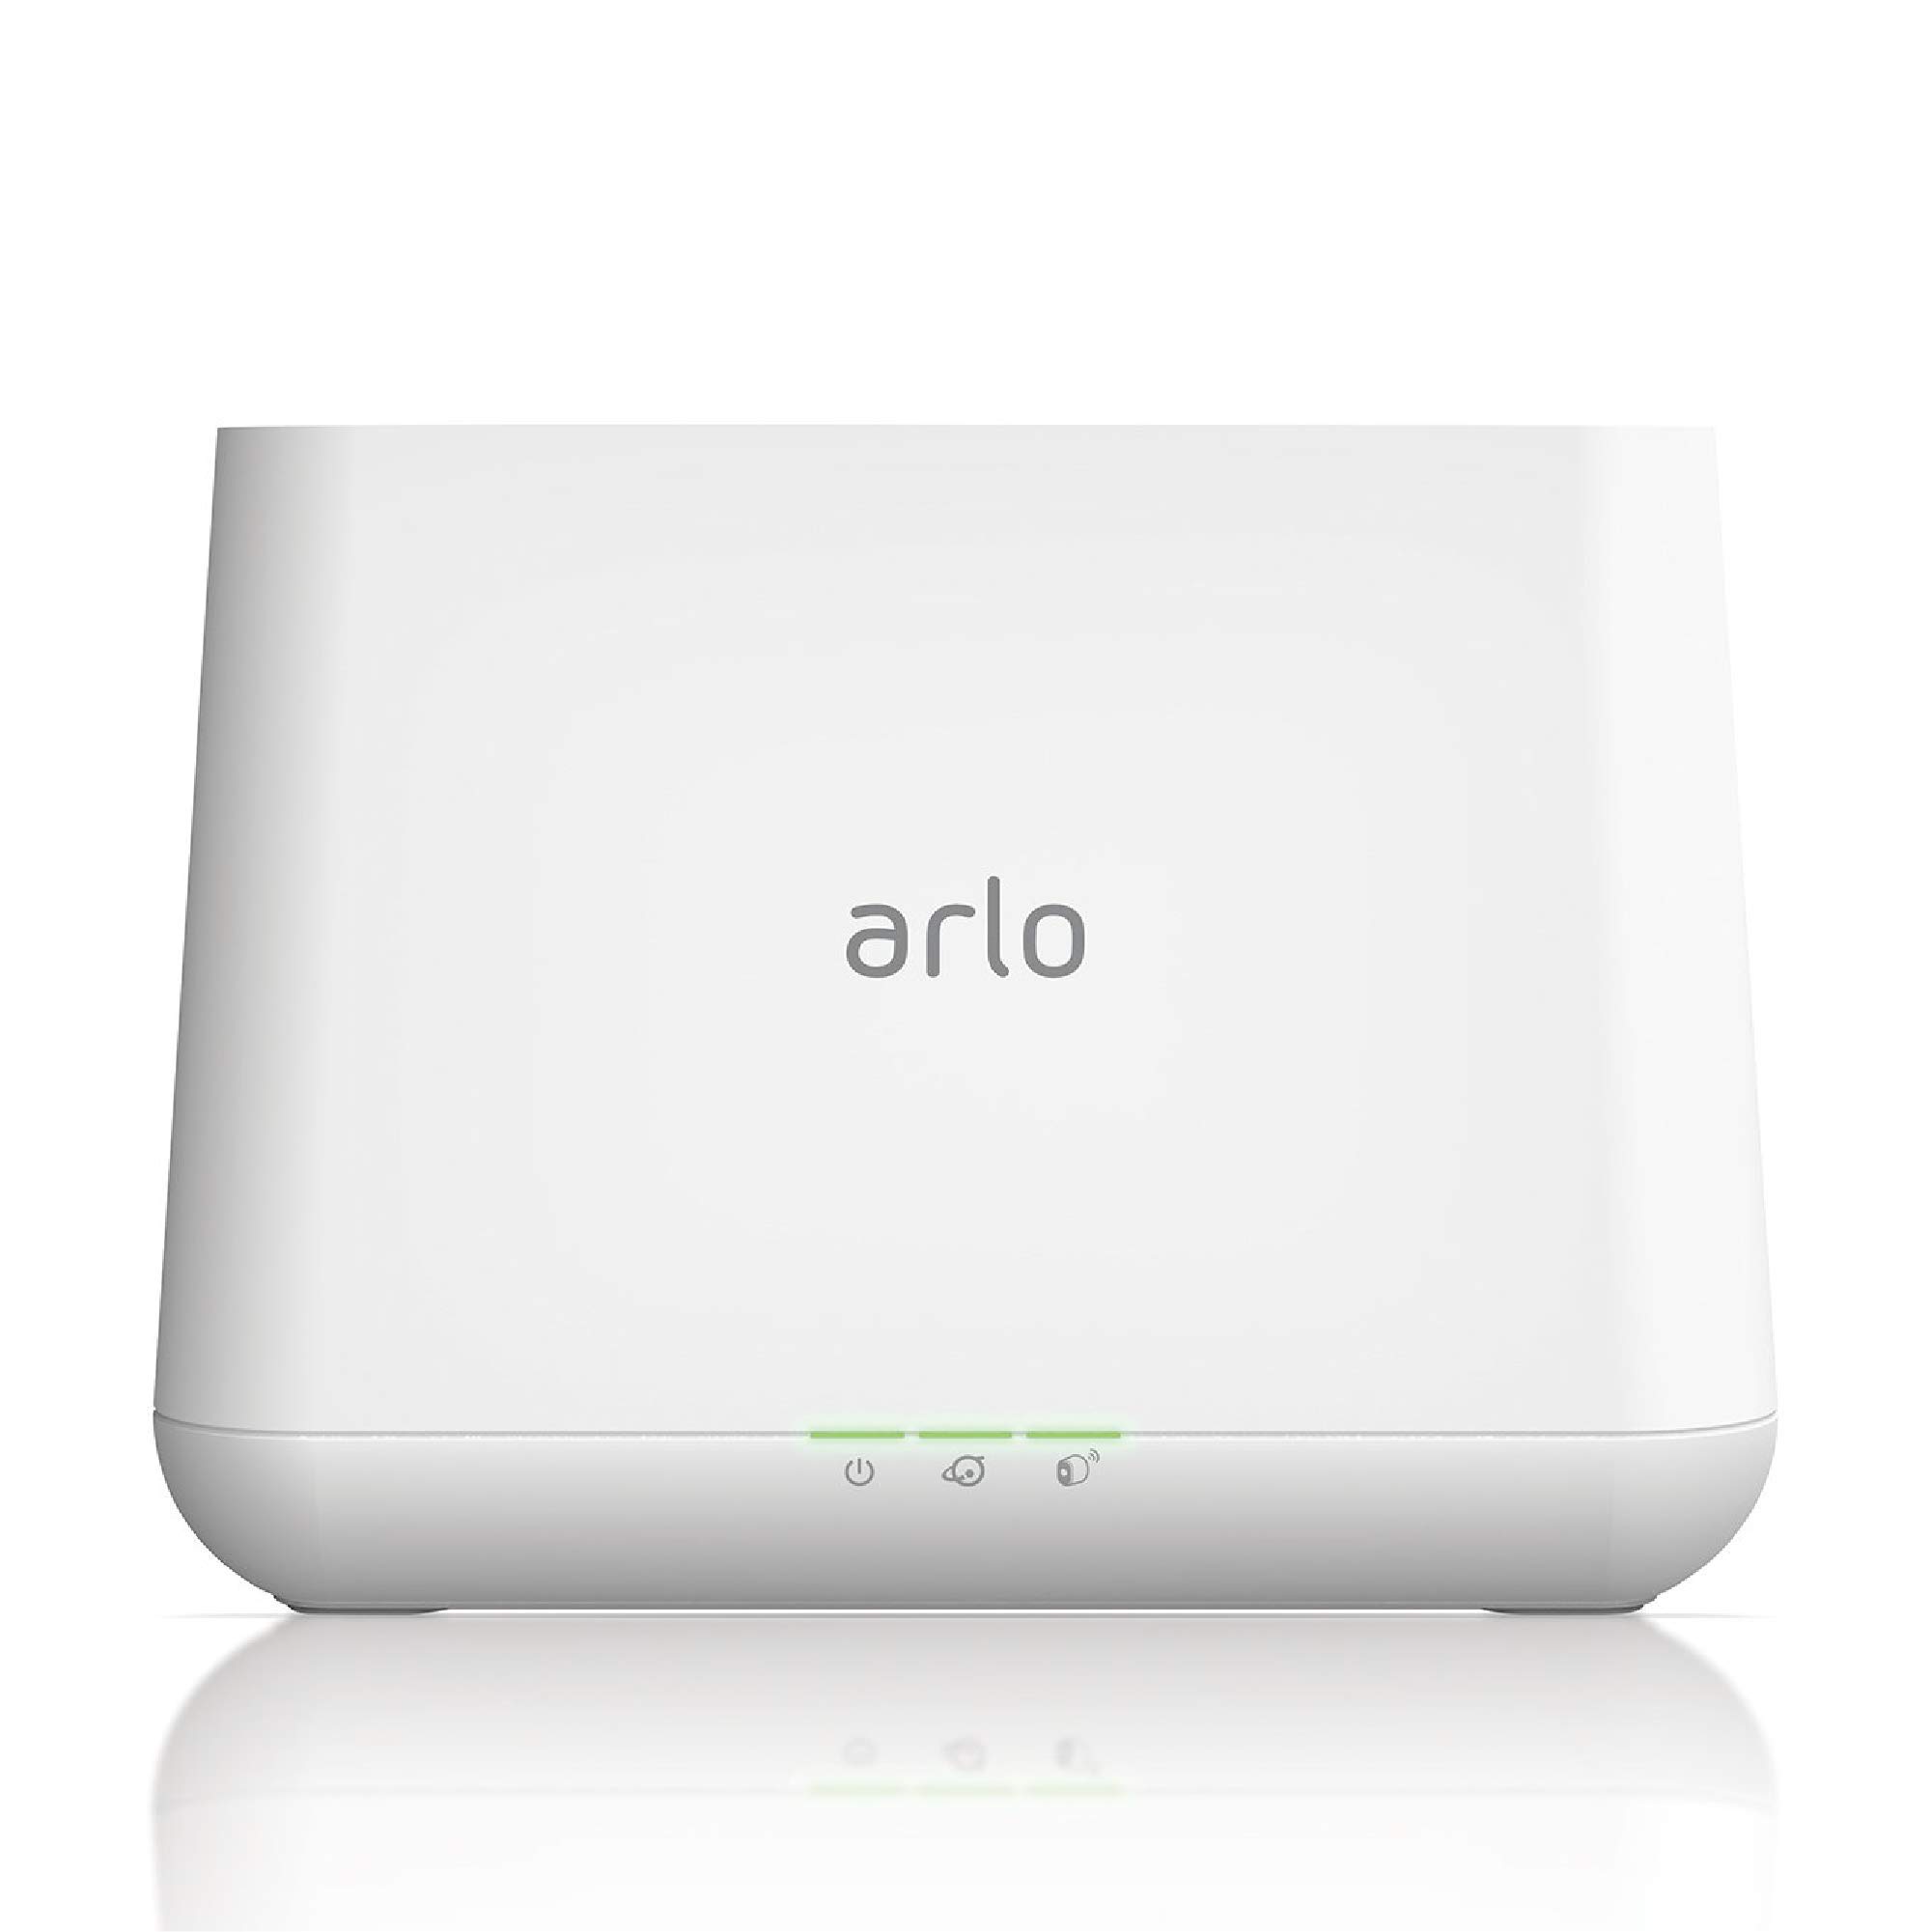 Arlo Base Station - Arlo Certified Accessory - Build Out Your Arlo Kit, Works with Pro, Pro 2 Cameras, White - VMB4000